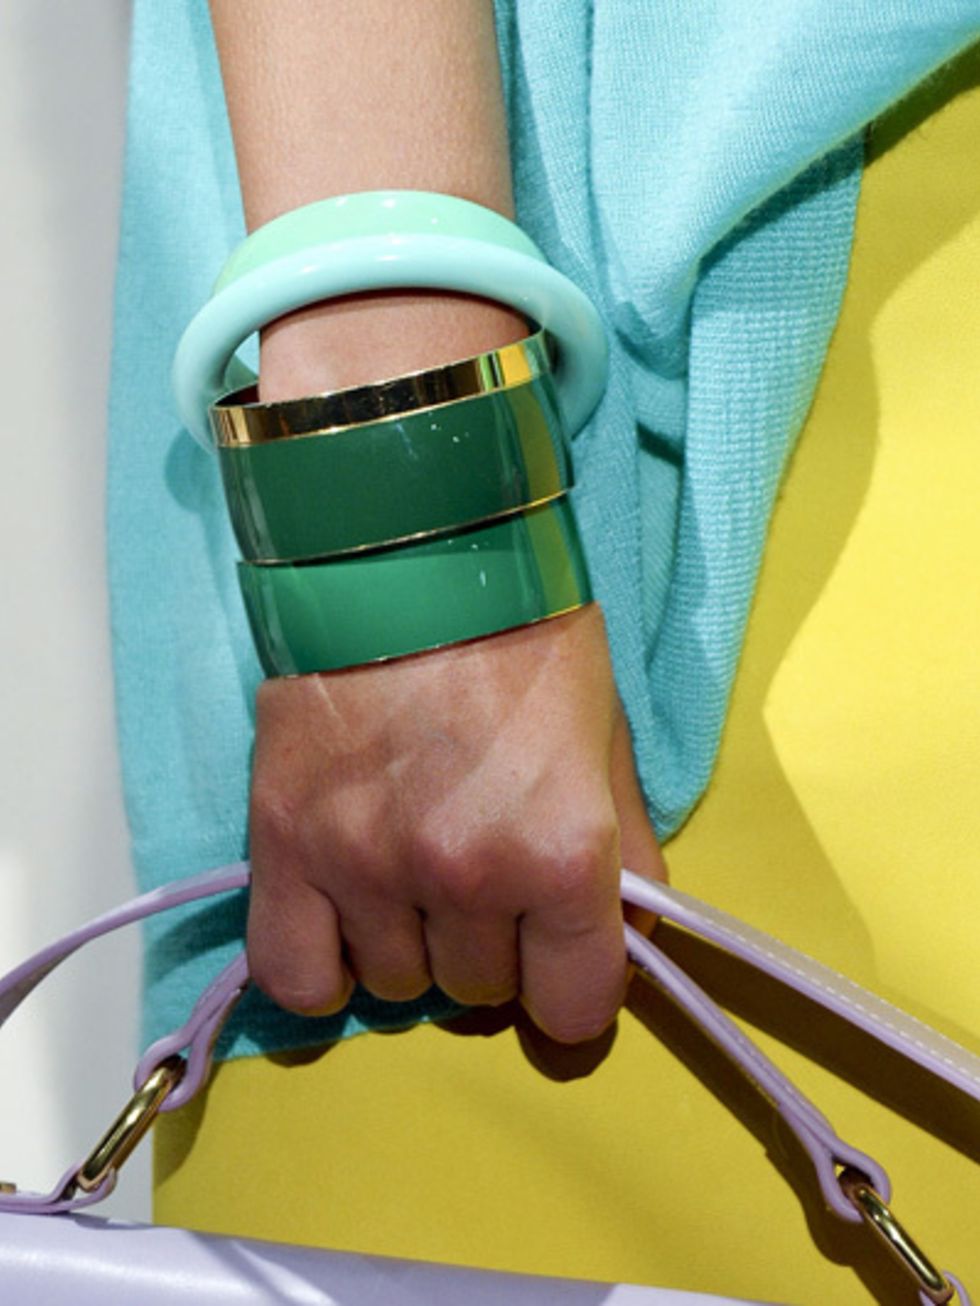 Finger, Joint, Wrist, Teal, Turquoise, Aqua, Musical instrument accessory, Paint, Strap, Cleanliness, 